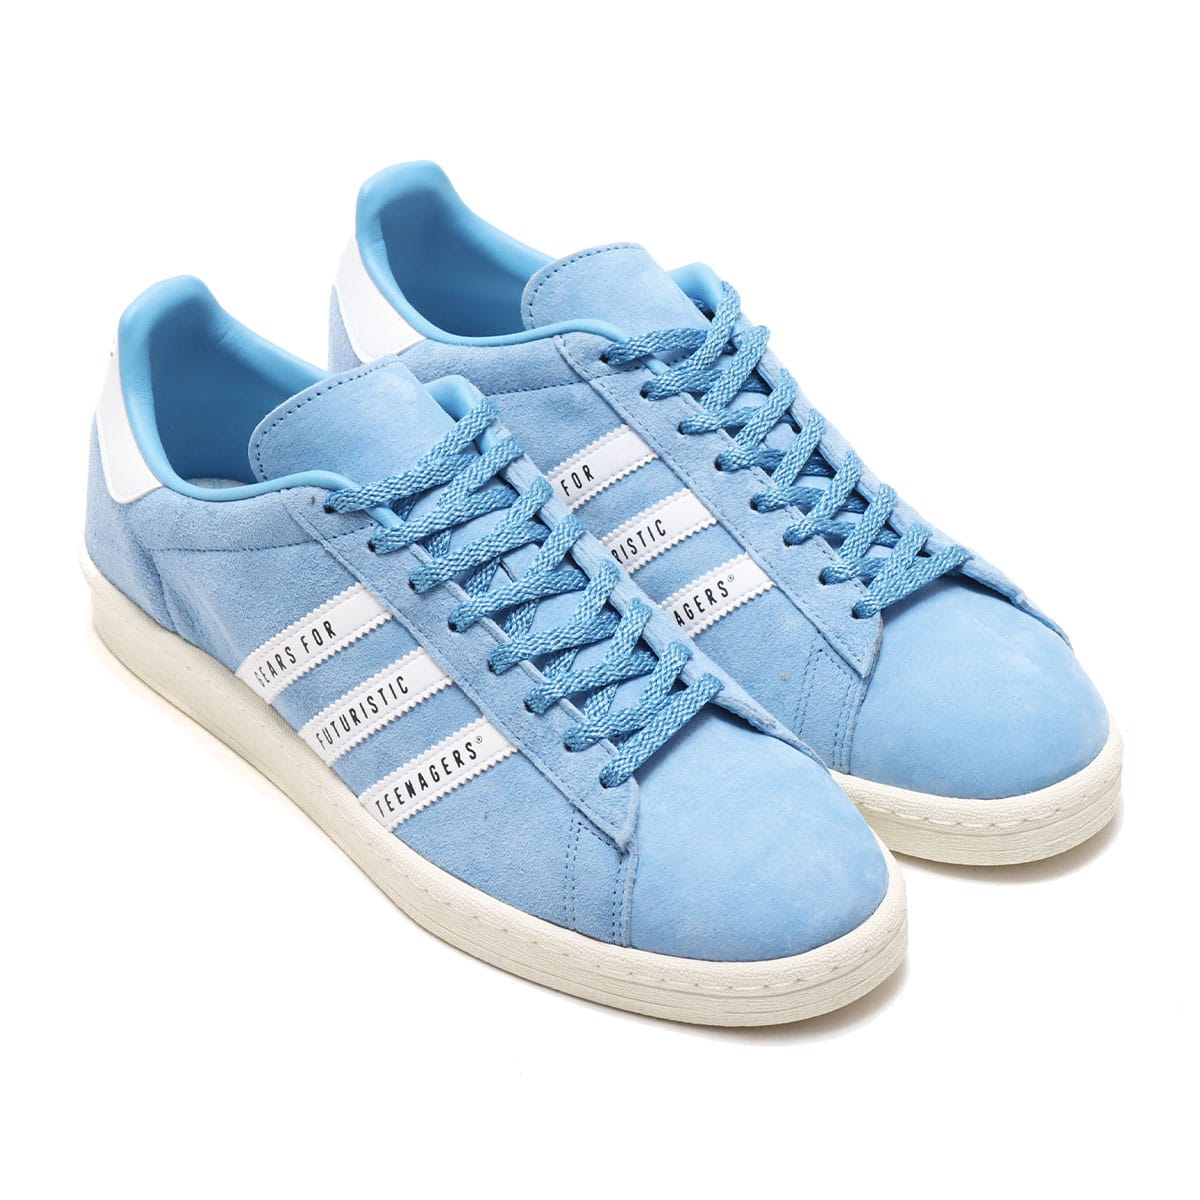 adidas CAMPUS HUMAN MADE LIGHT BLUE/FTWR WHITE/OFF WHITE 20SS-S